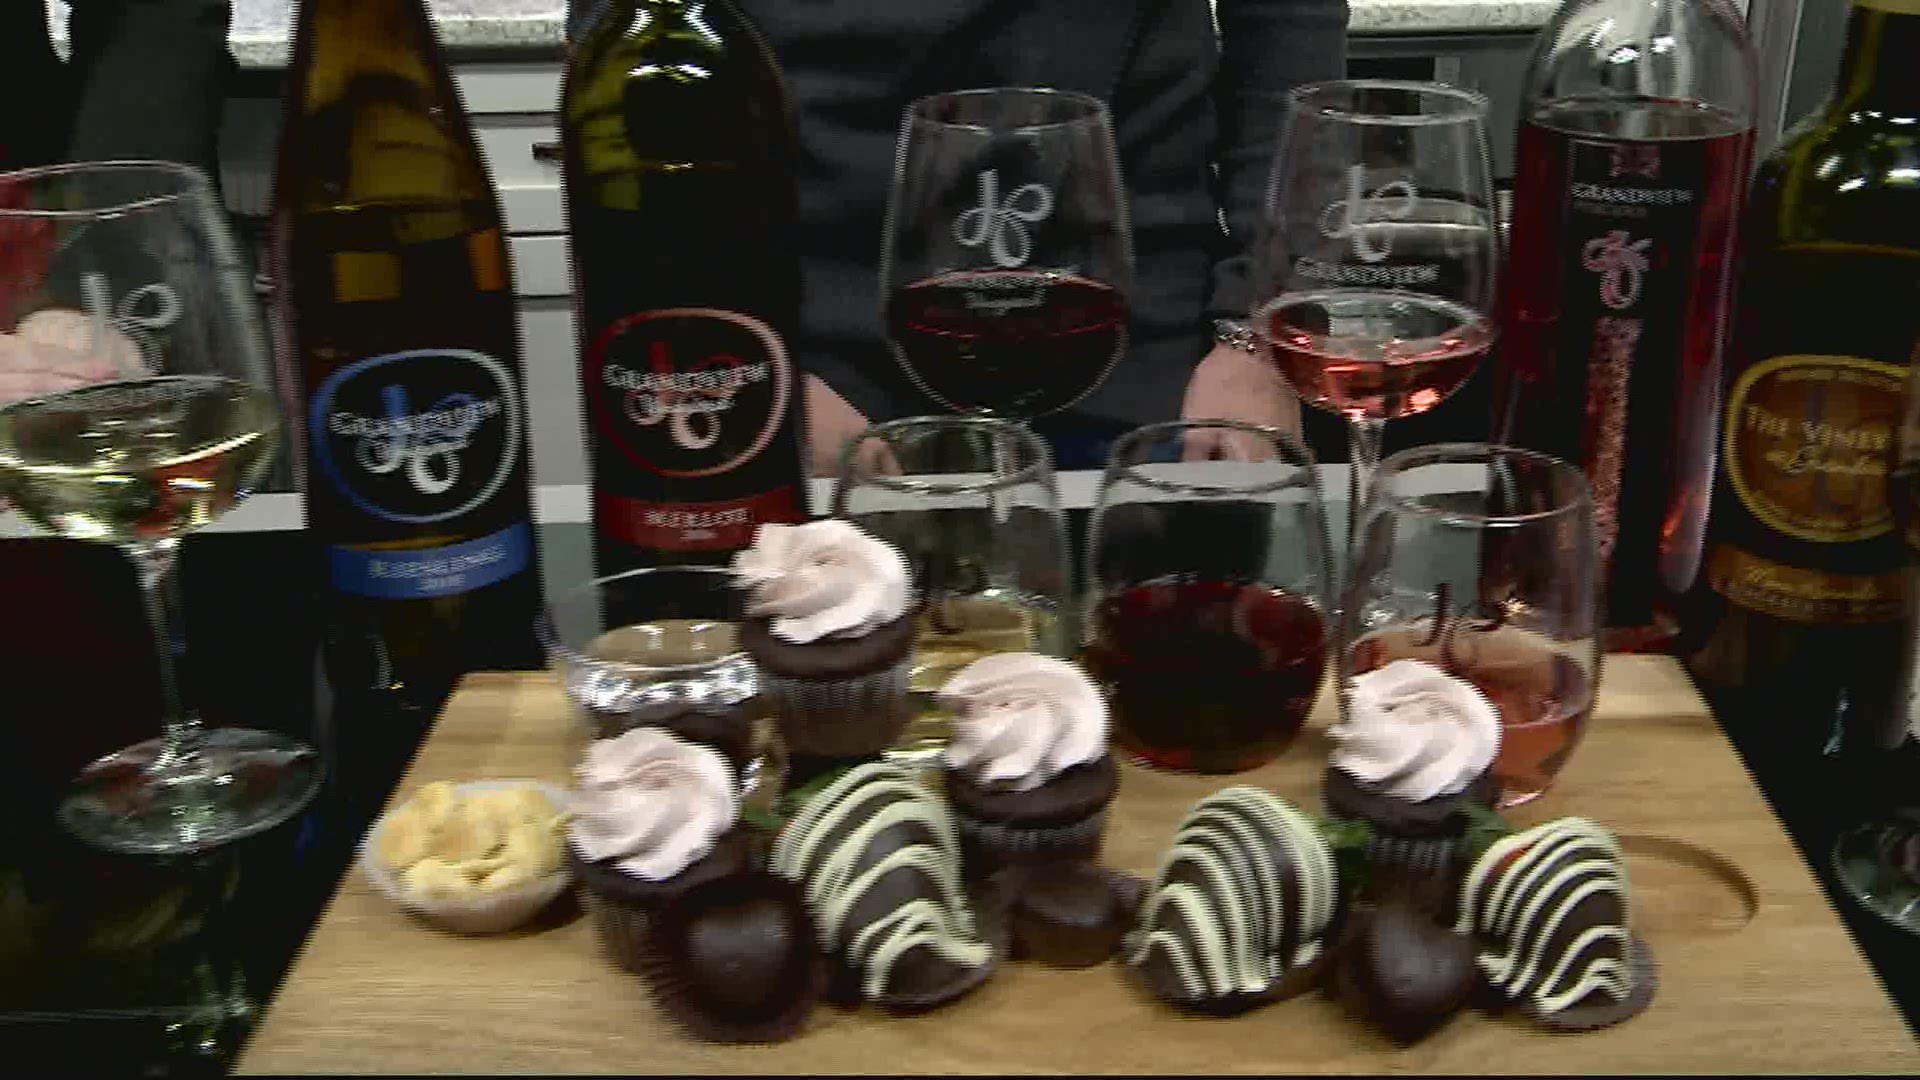 Pair sweet chocolate with your favorite wine.